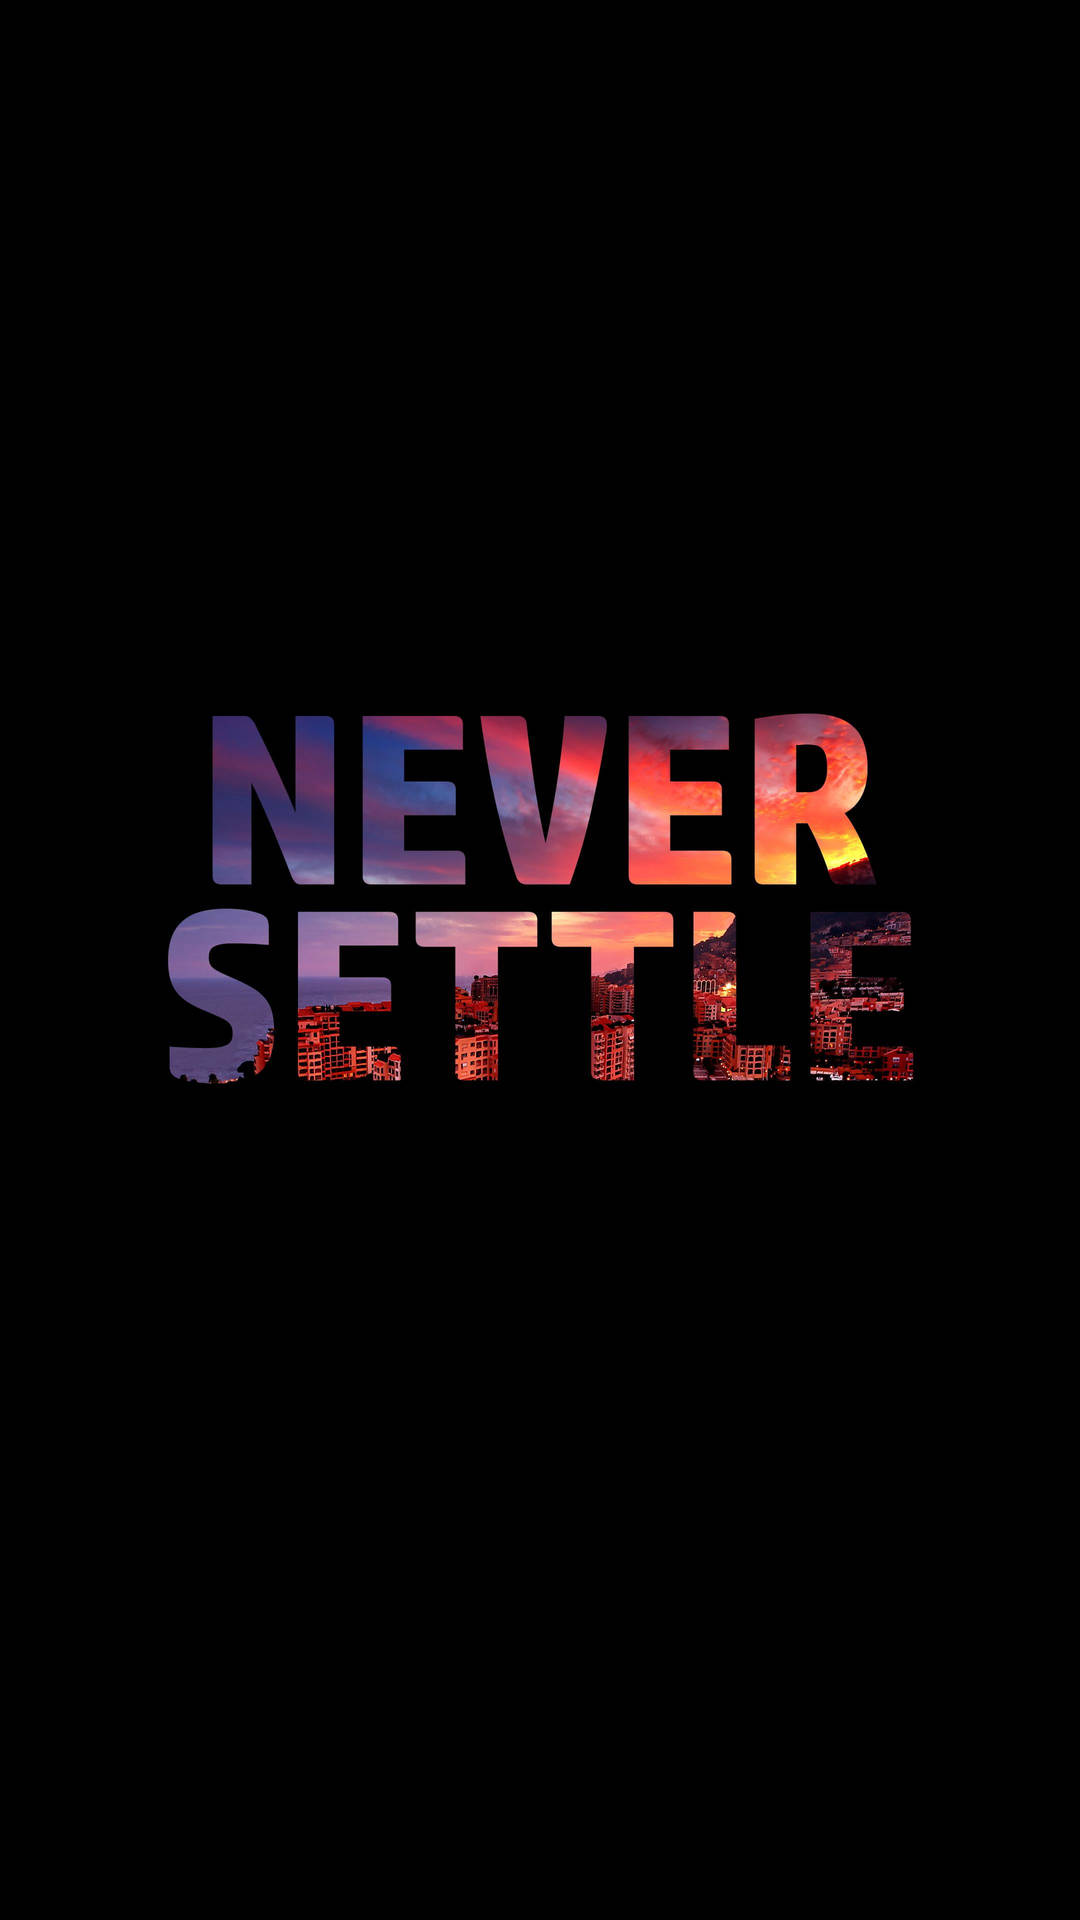 Amoled Android Quote Art Background